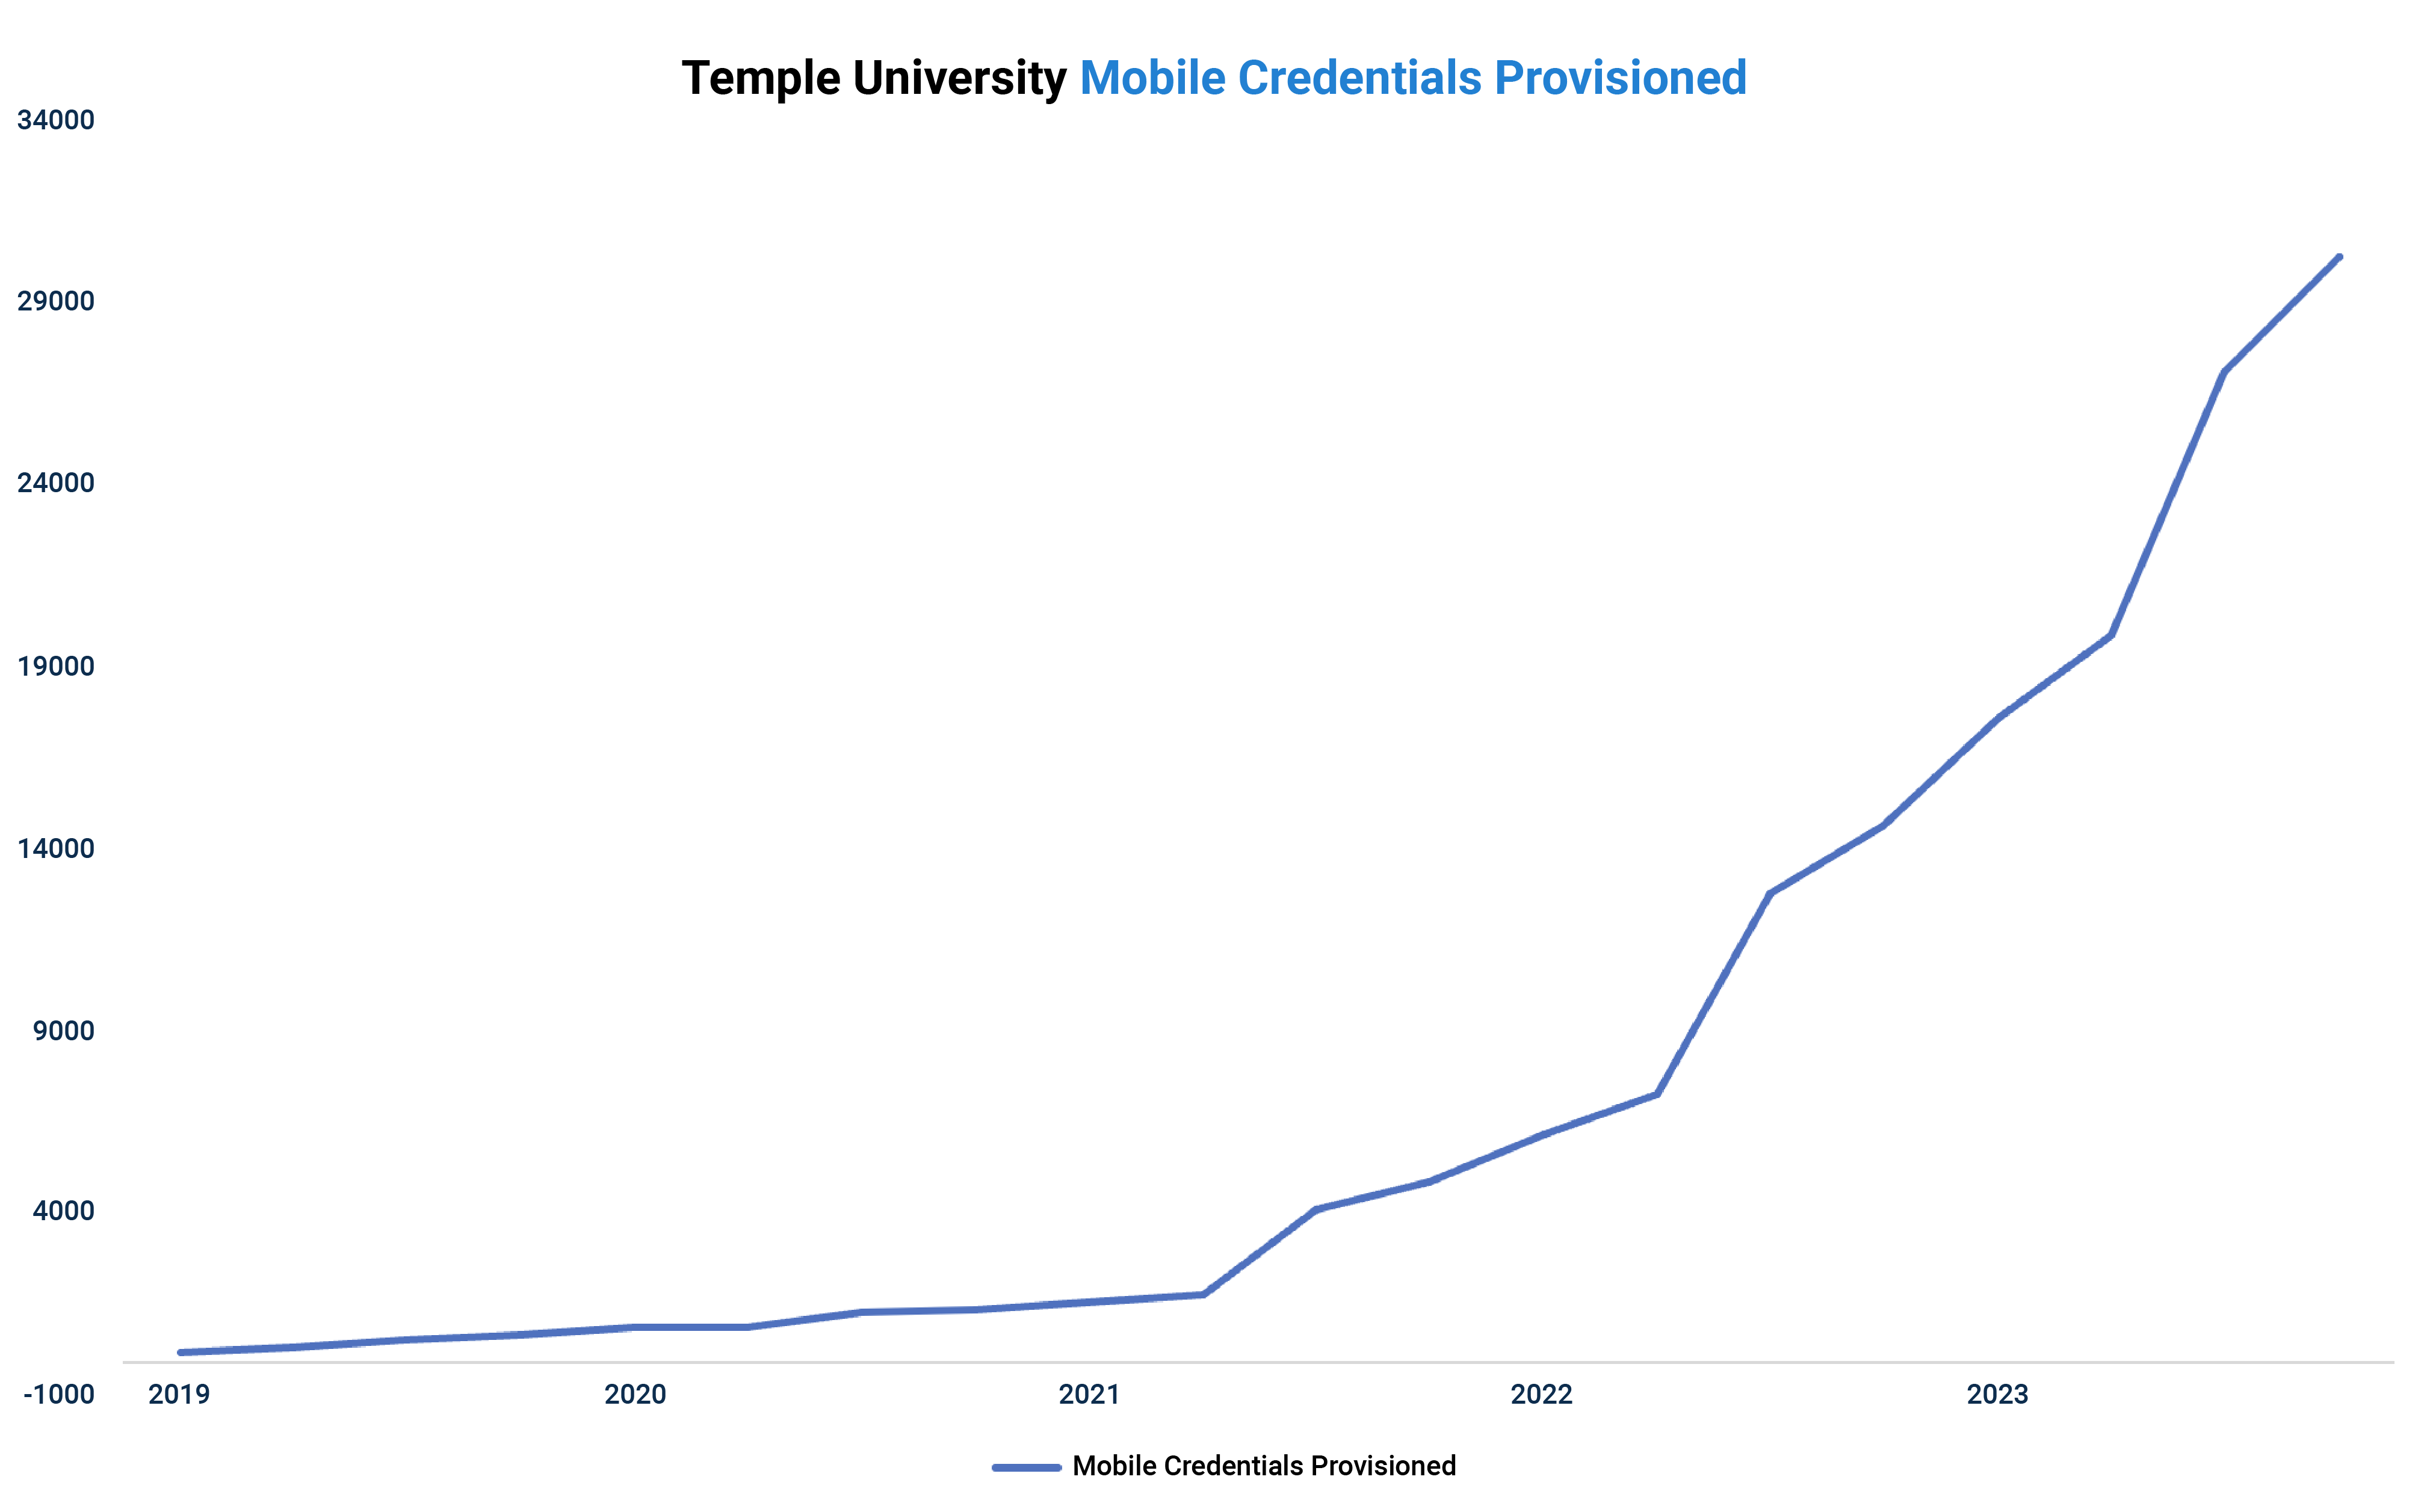 Temple University Mobile Credential Adoptions